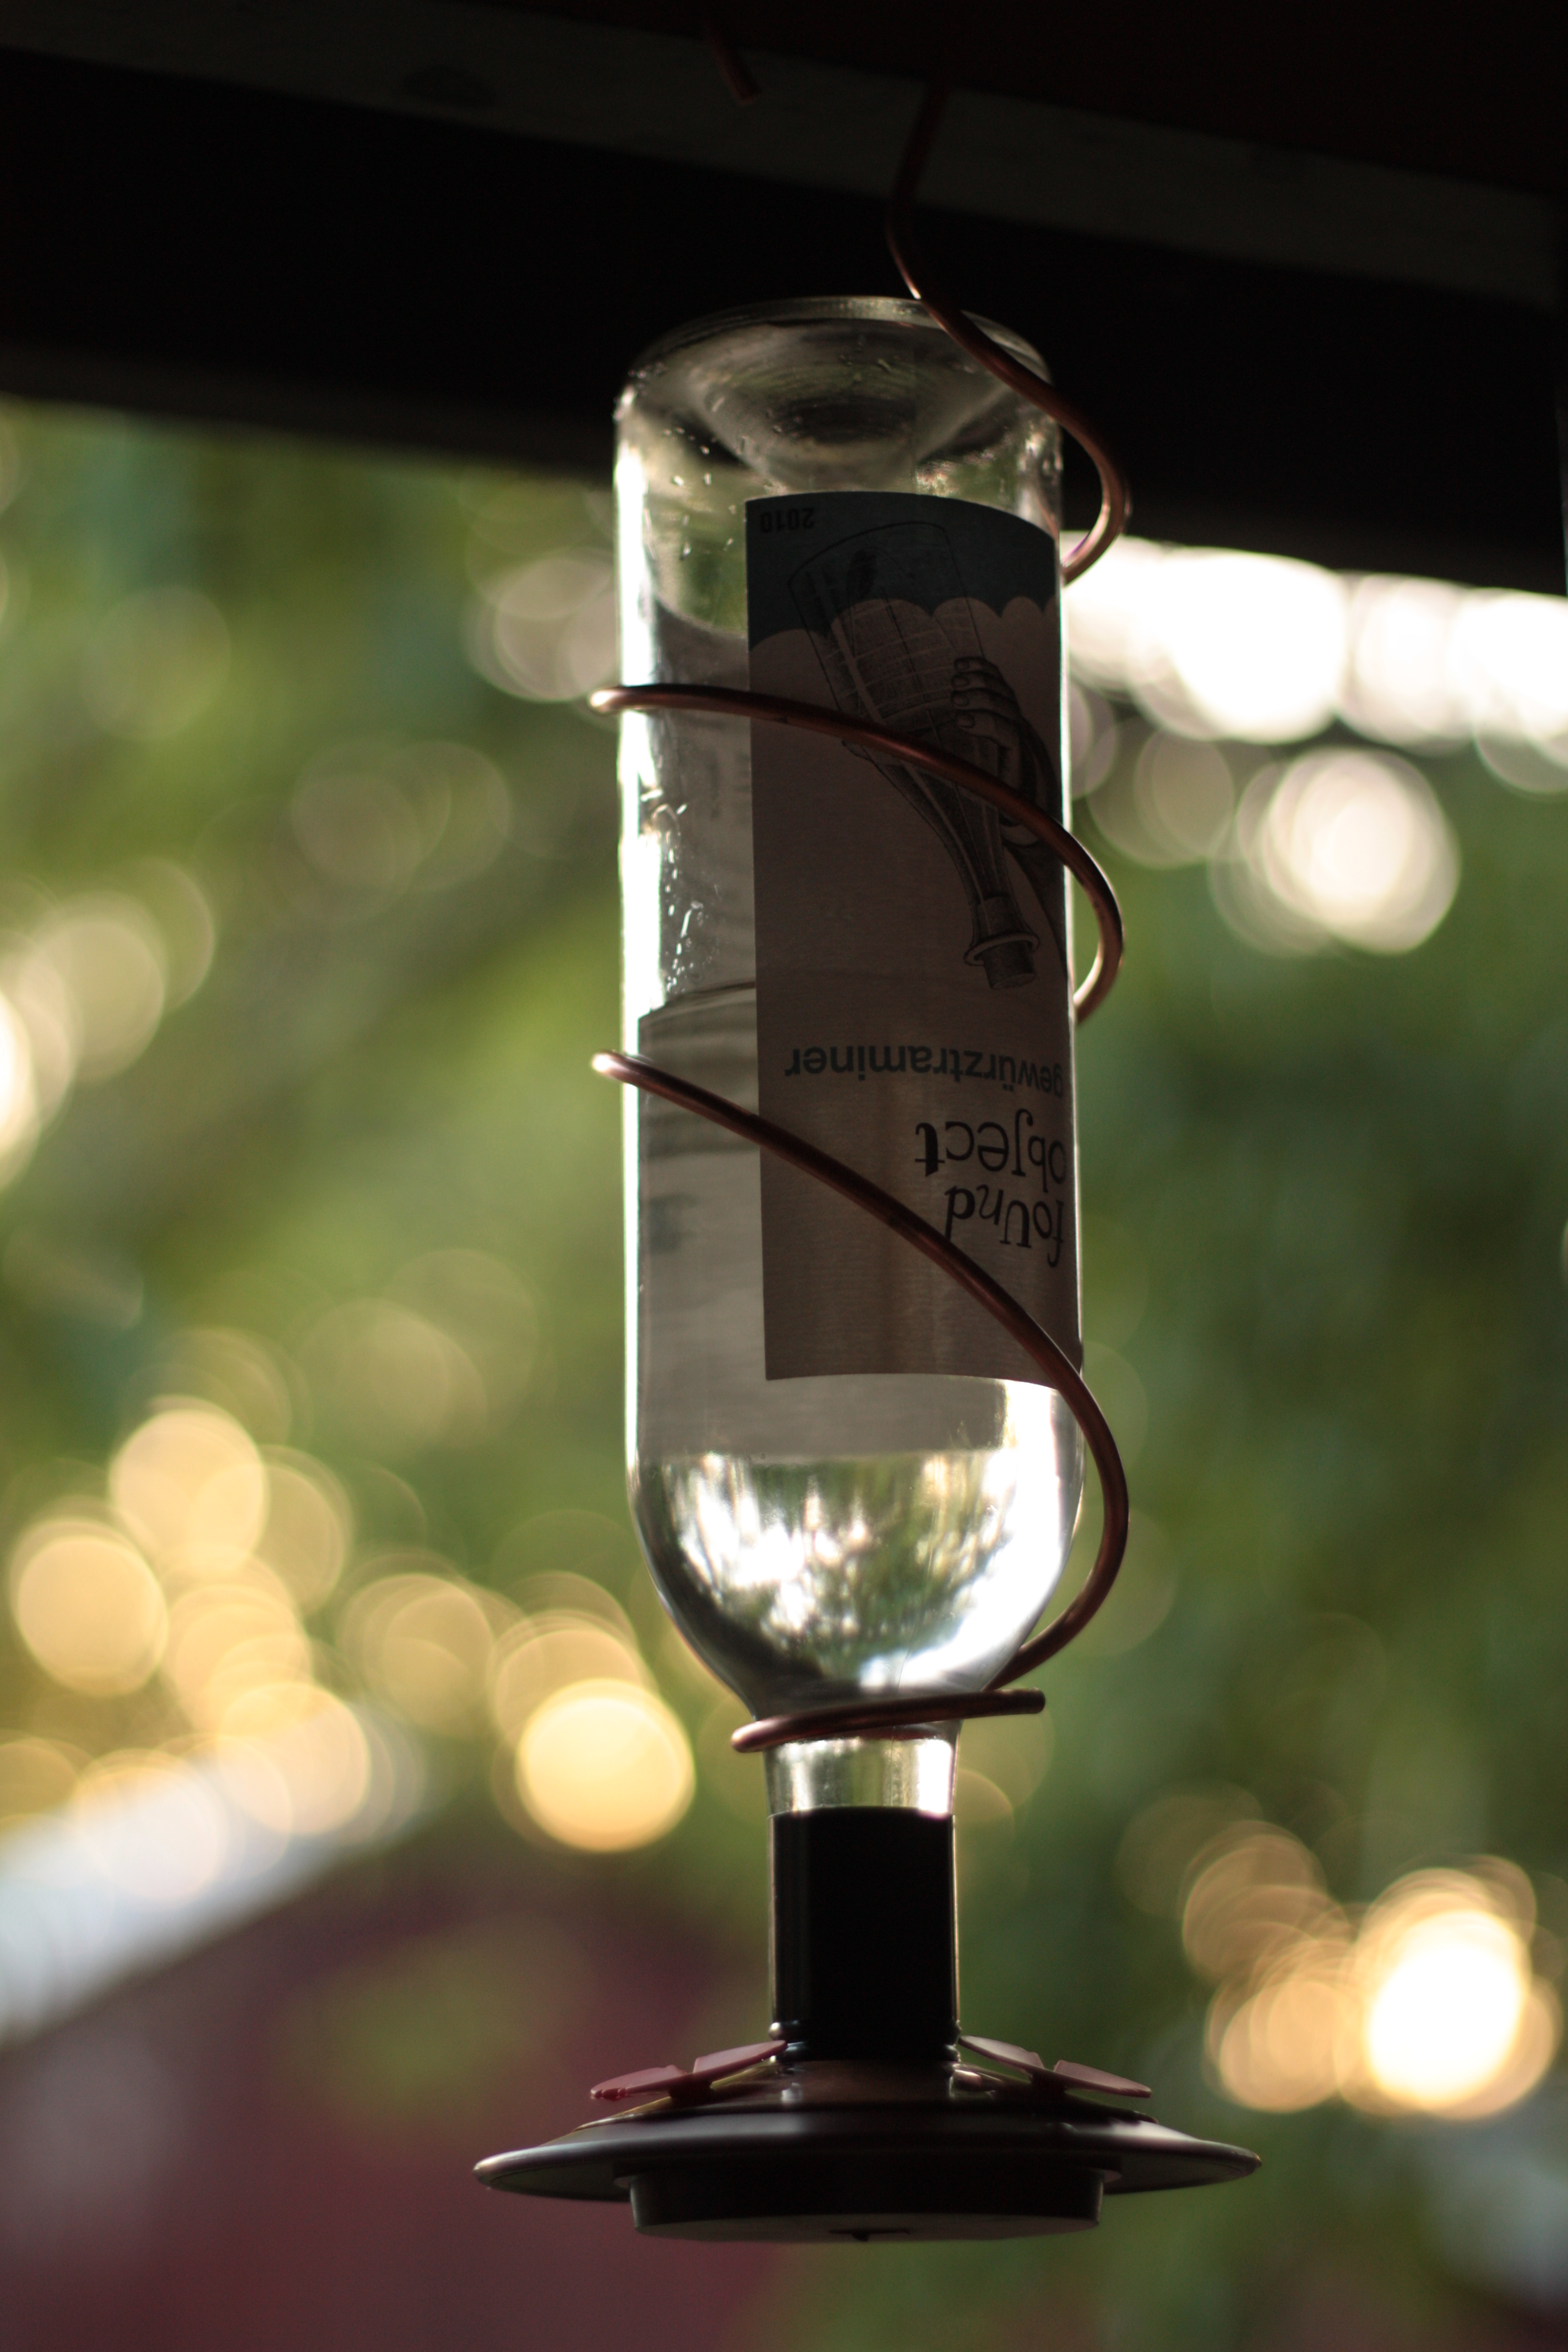 A wine bottle upcycled into a bird feeder hangs from a porch eave.